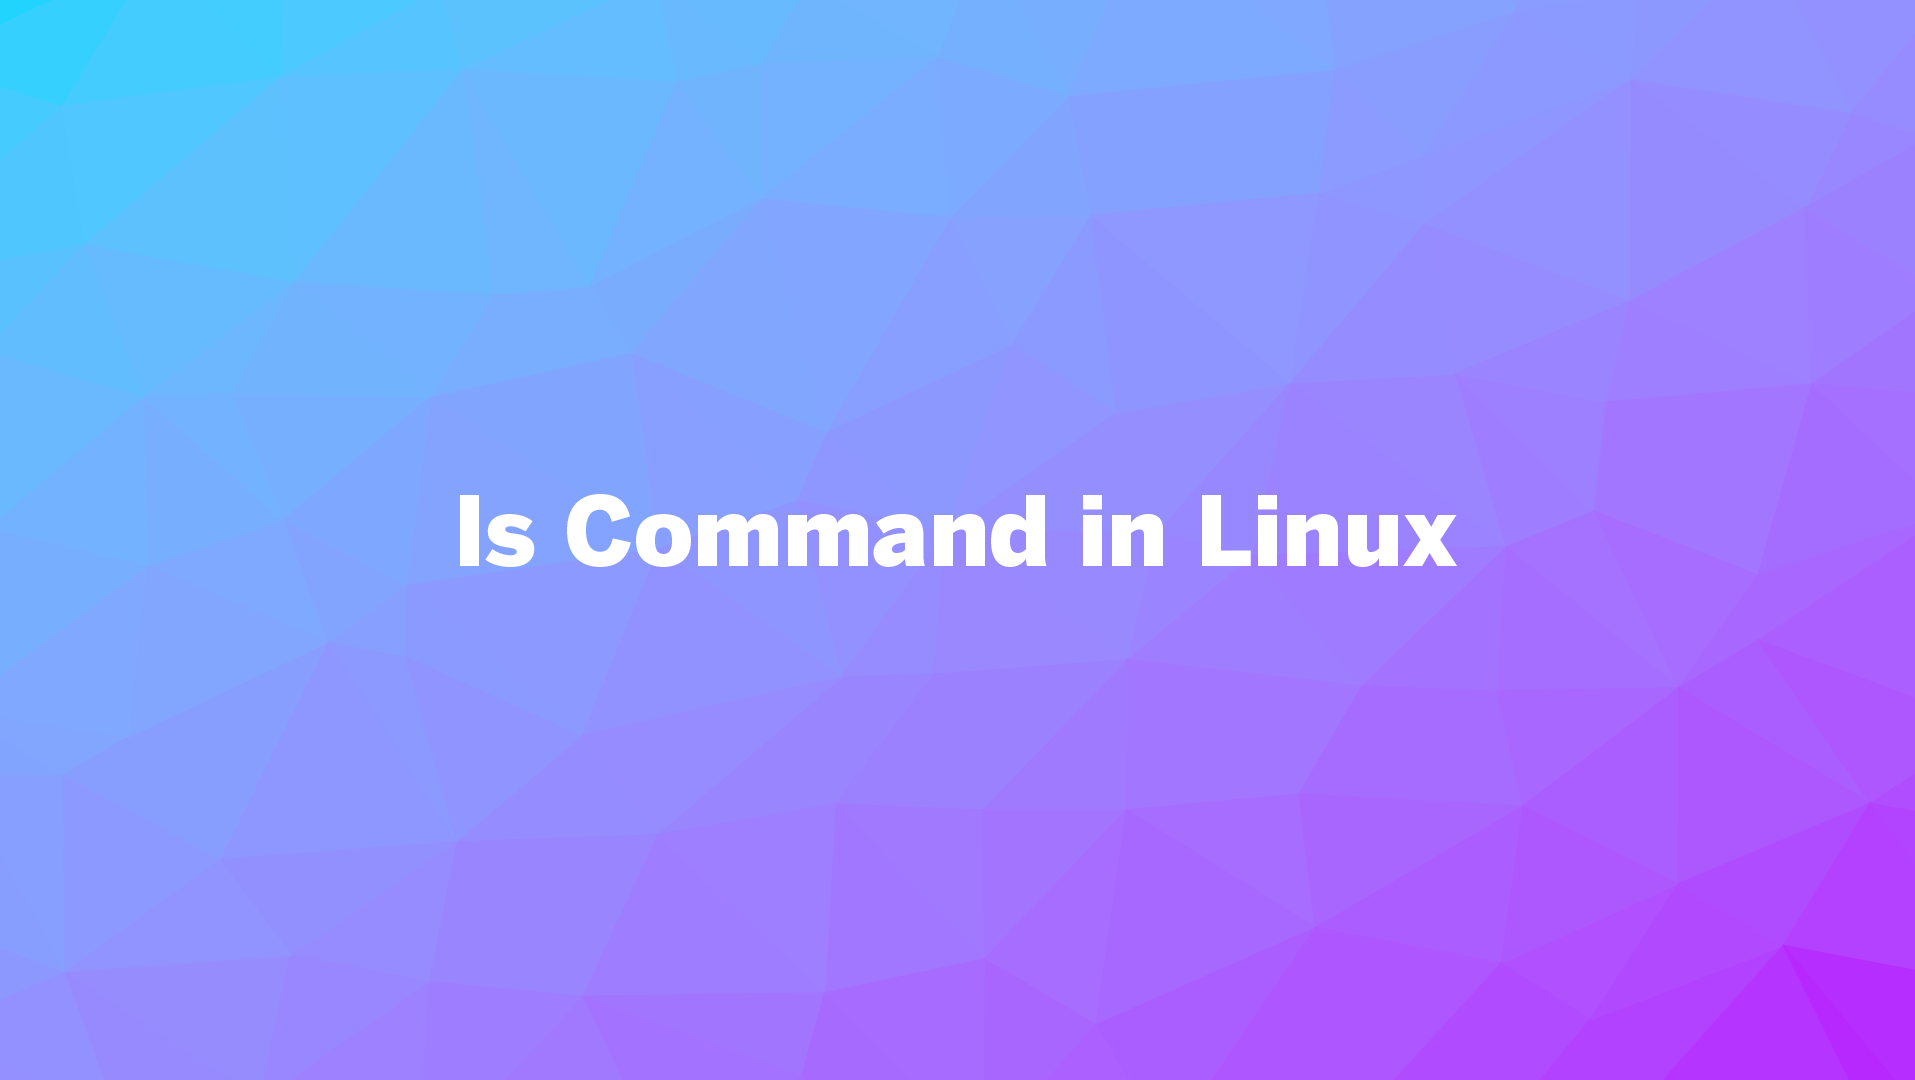 ls command in linux